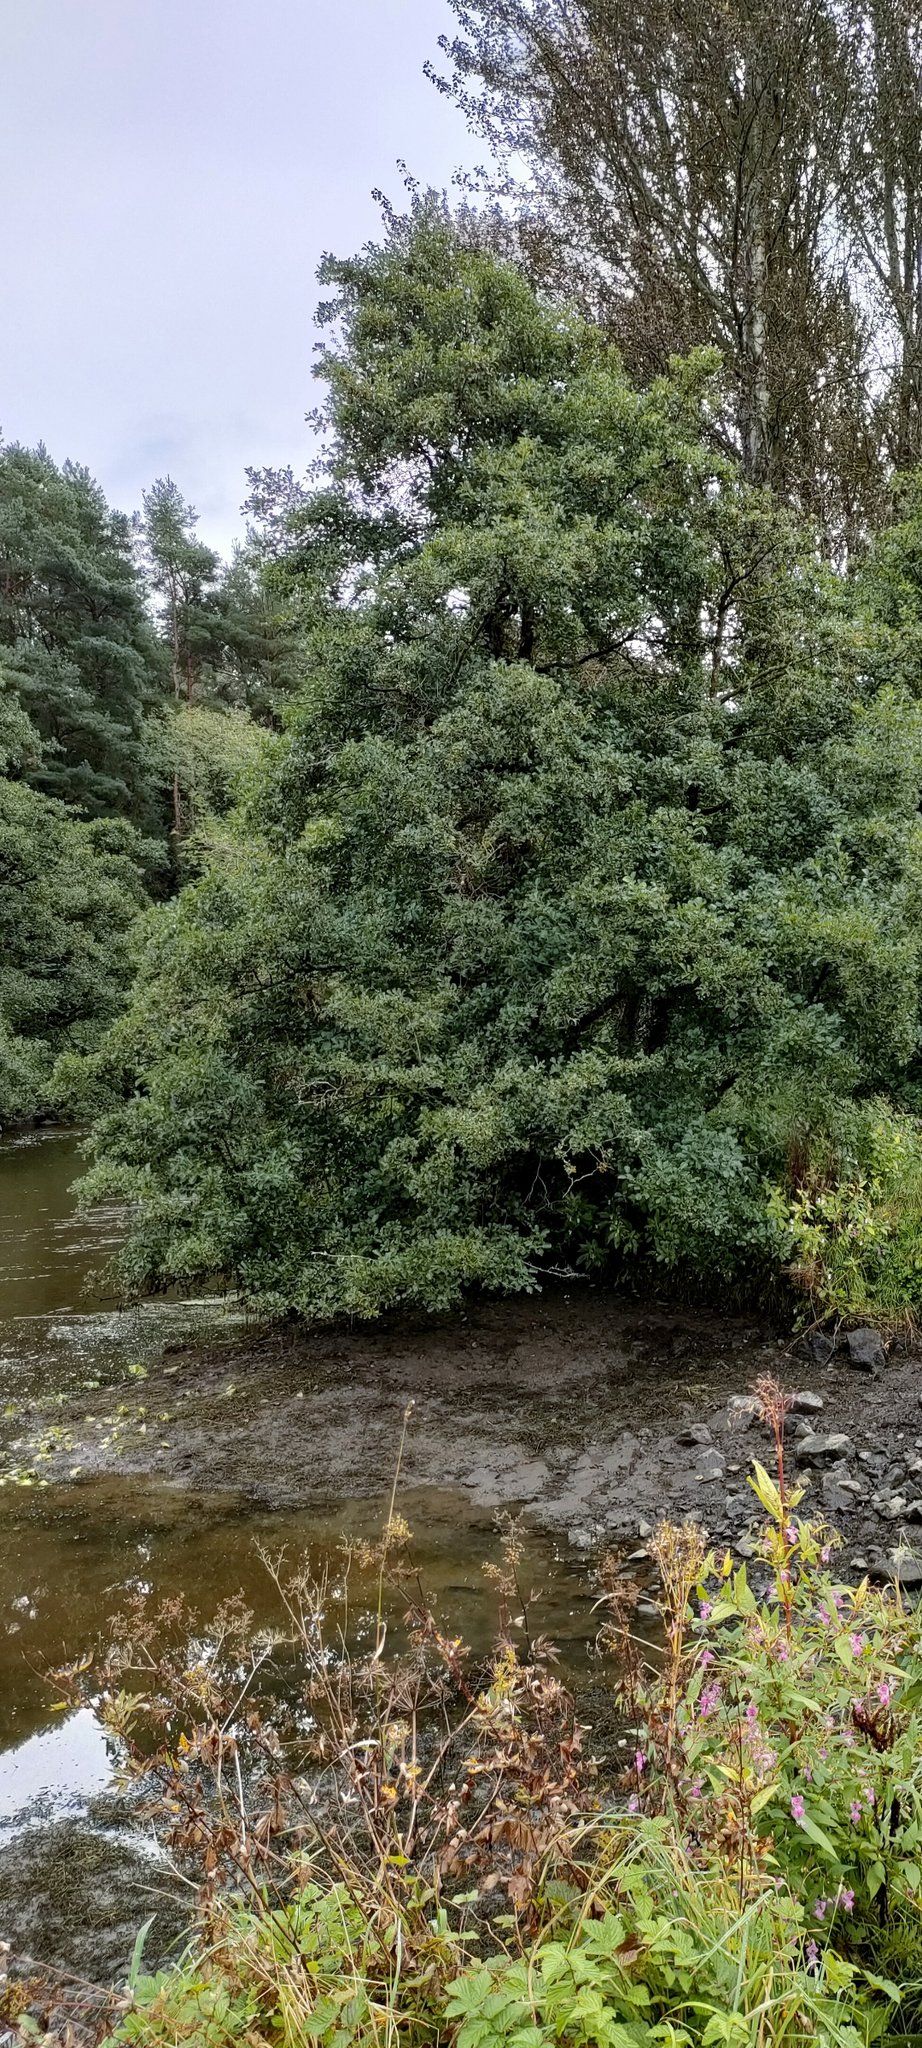 THIRSTY: The alder thrives when it has access to water